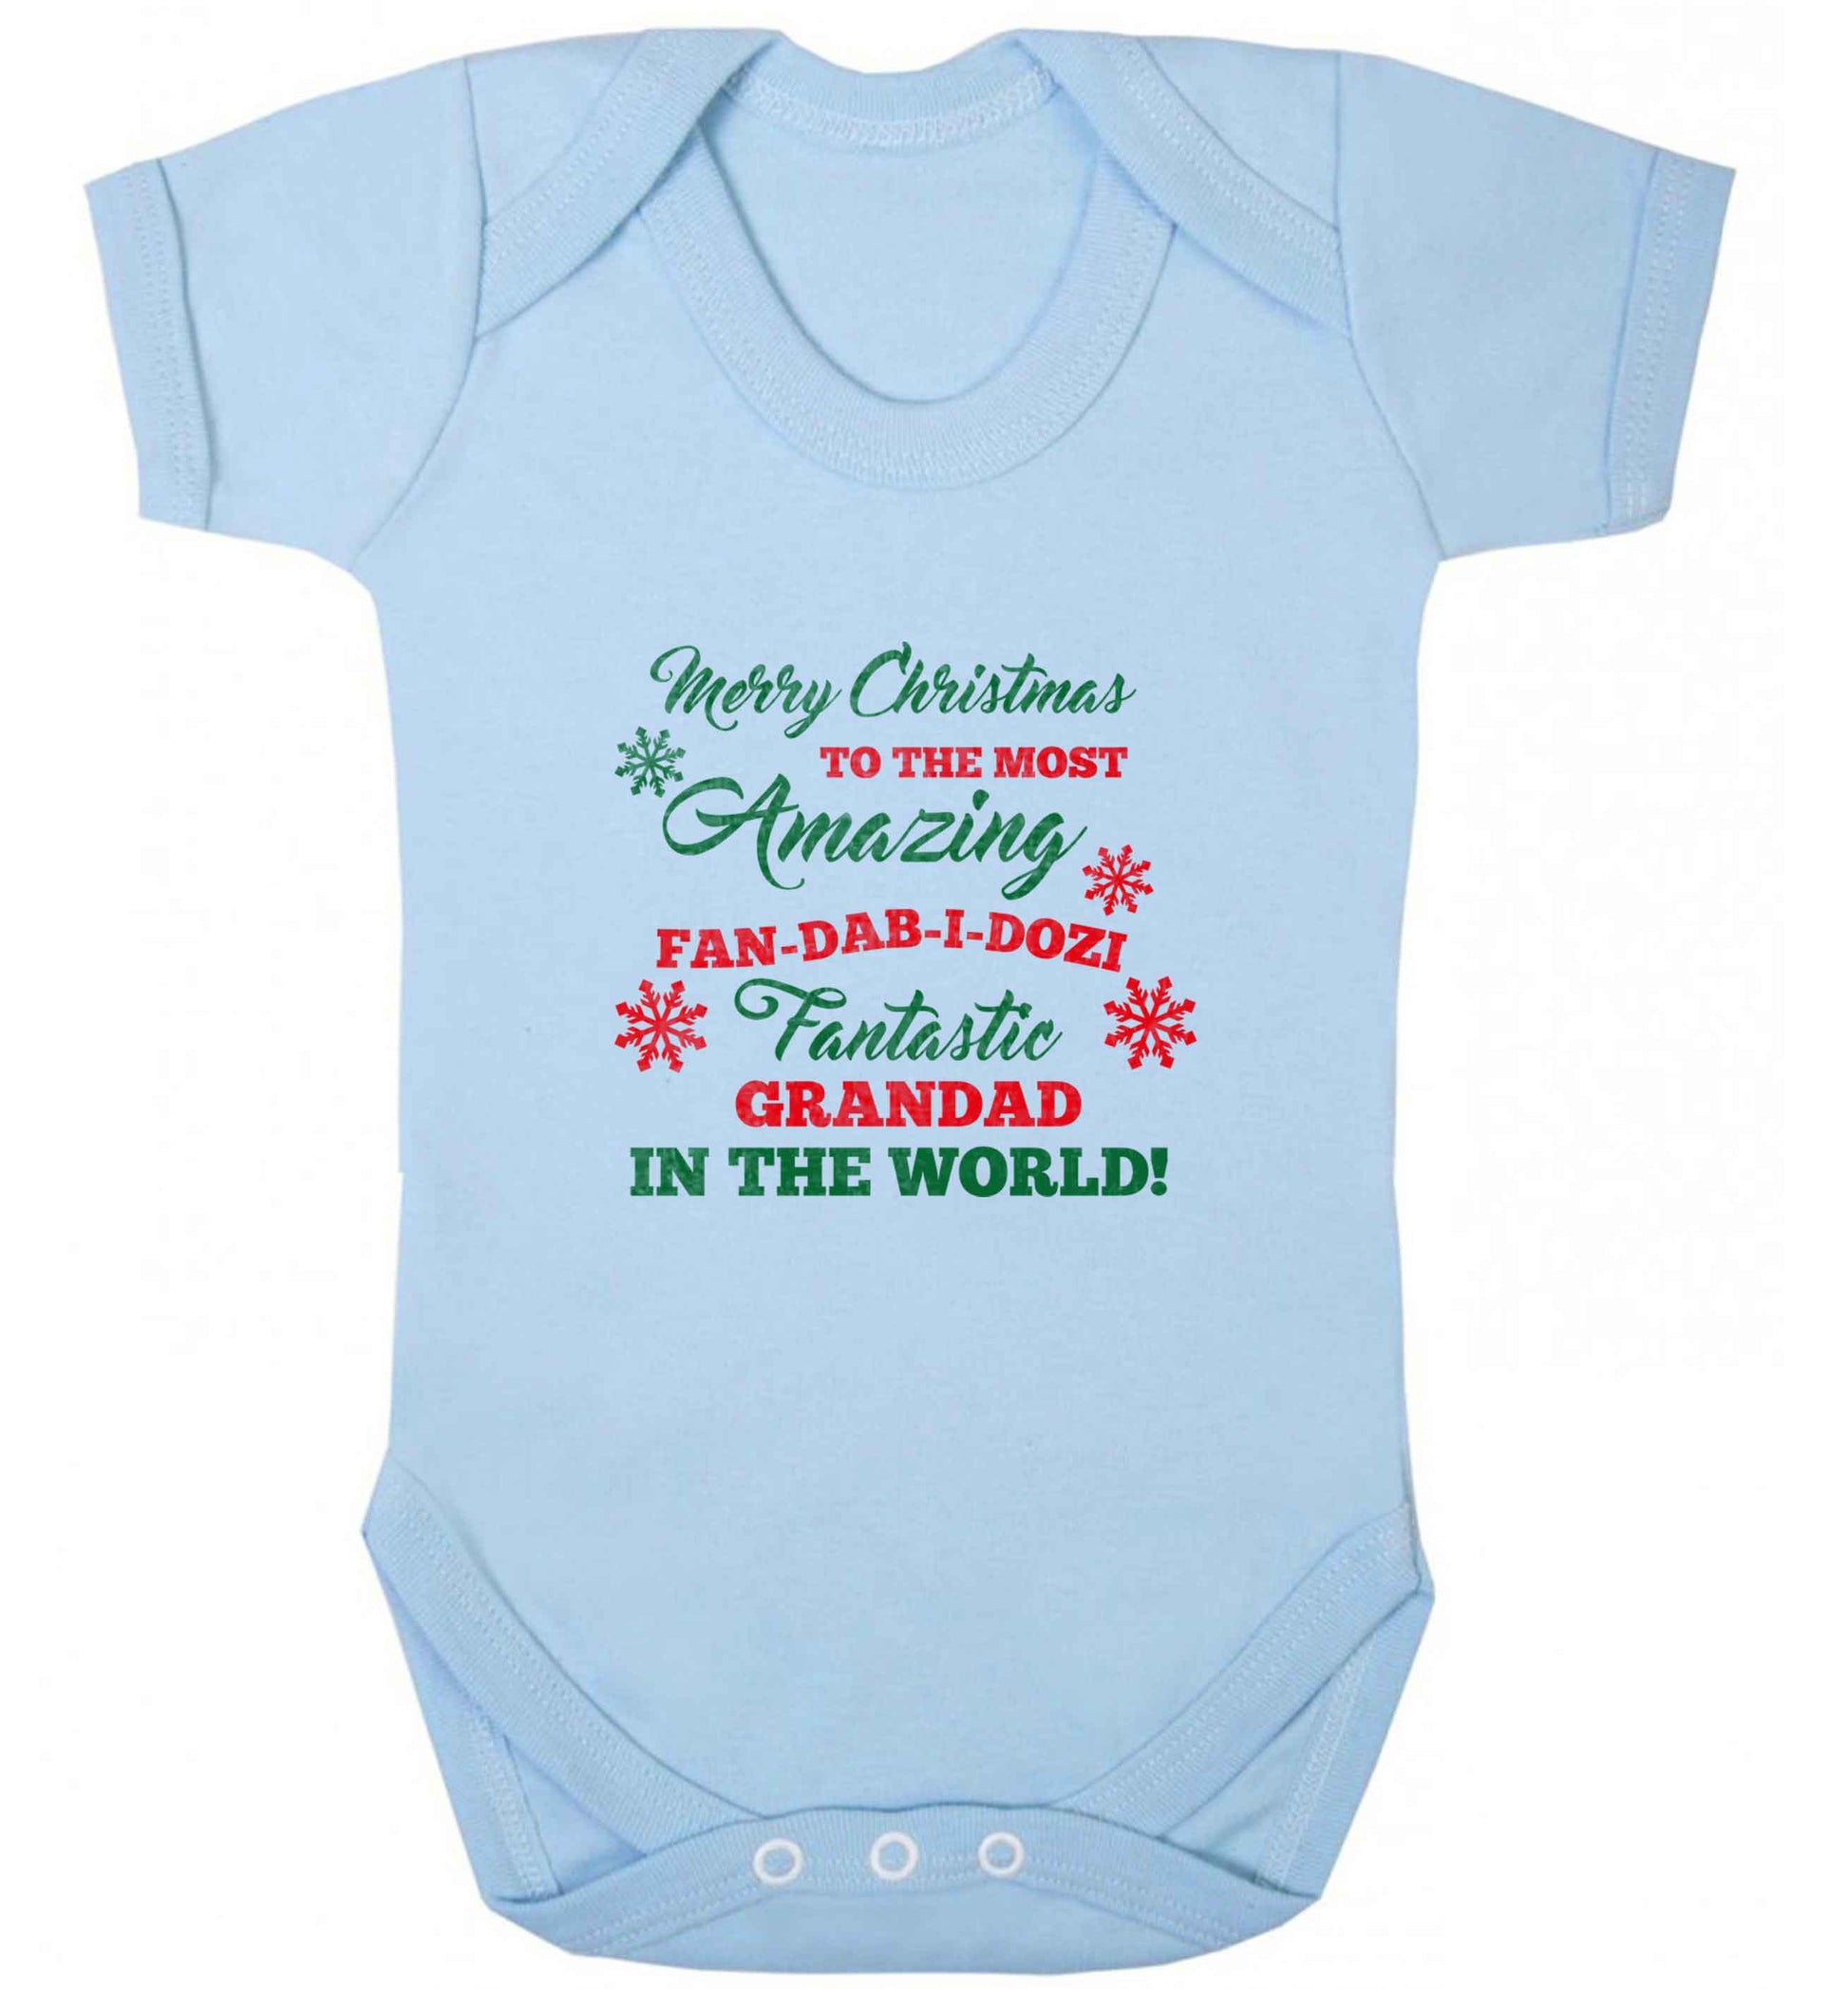 Merry Christmas to the most amazing fan-dab-i-dozi fantasic Grandad in the world baby vest pale blue 18-24 months